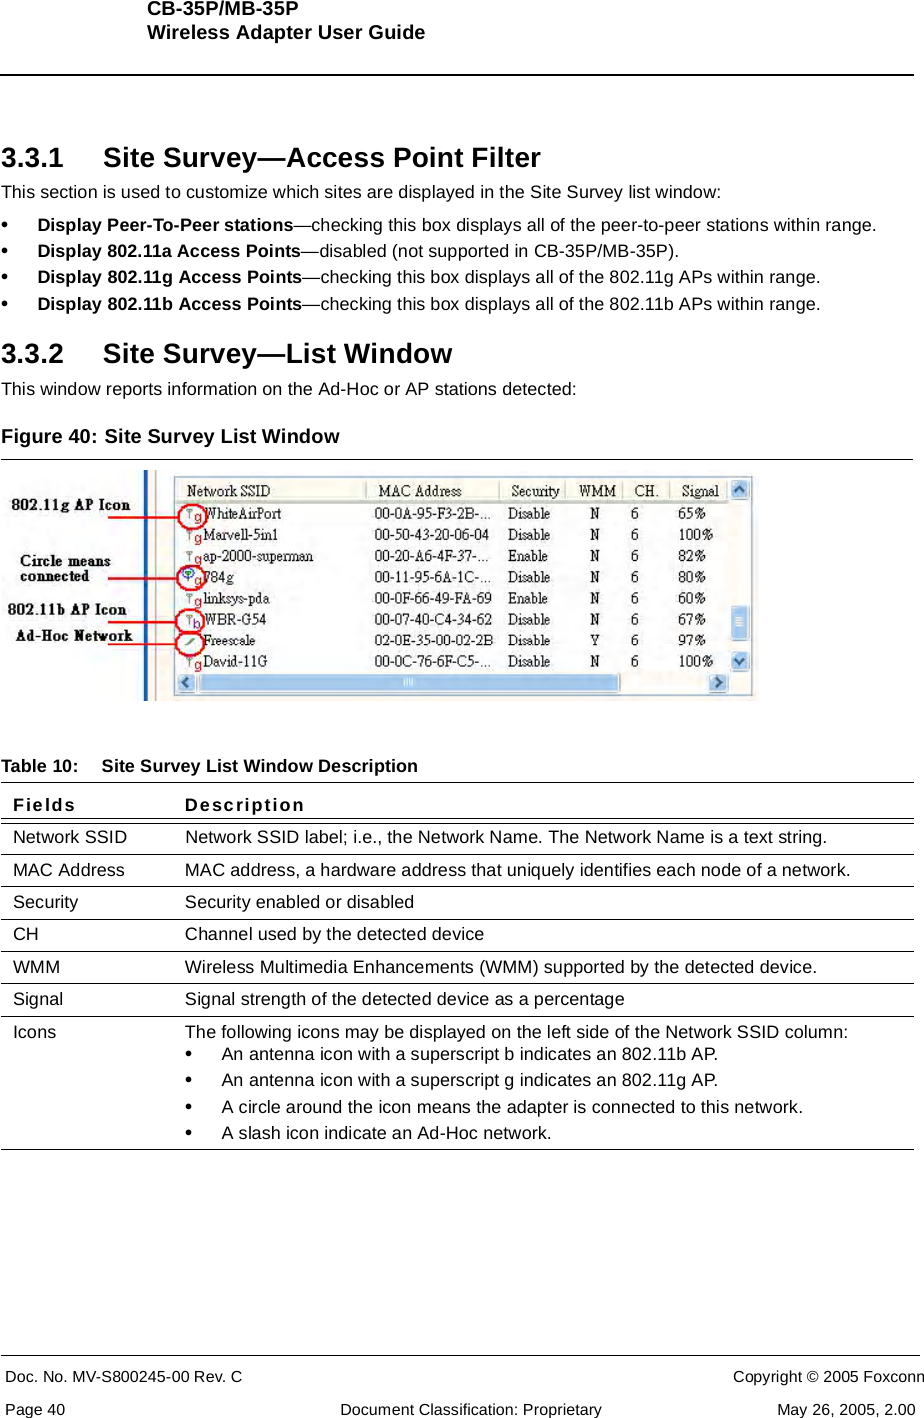 CB-35P/MB-35P Wireless Adapter User GuideDoc. No. MV-S800245-00 Rev. C  CONFIDENTIAL  Copyright © 2005 FoxconnPage 40  Document Classification: Proprietary May 26, 2005, 2.003.3.1 Site Survey—Access Point FilterThis section is used to customize which sites are displayed in the Site Survey list window:•Display Peer-To-Peer stations—checking this box displays all of the peer-to-peer stations within range.•Display 802.11a Access Points—disabled (not supported in CB-35P/MB-35P).•Display 802.11g Access Points—checking this box displays all of the 802.11g APs within range.•Display 802.11b Access Points—checking this box displays all of the 802.11b APs within range.3.3.2 Site Survey—List WindowThis window reports information on the Ad-Hoc or AP stations detected:Figure 40: Site Survey List Window Table 10: Site Survey List Window DescriptionFields DescriptionNetwork SSID Network SSID label; i.e., the Network Name. The Network Name is a text string.MAC Address MAC address, a hardware address that uniquely identifies each node of a network. Security Security enabled or disabledCH Channel used by the detected deviceWMM Wireless Multimedia Enhancements (WMM) supported by the detected device.Signal  Signal strength of the detected device as a percentageIcons The following icons may be displayed on the left side of the Network SSID column:•An antenna icon with a superscript b indicates an 802.11b AP.•An antenna icon with a superscript g indicates an 802.11g AP.•A circle around the icon means the adapter is connected to this network.•A slash icon indicate an Ad-Hoc network.